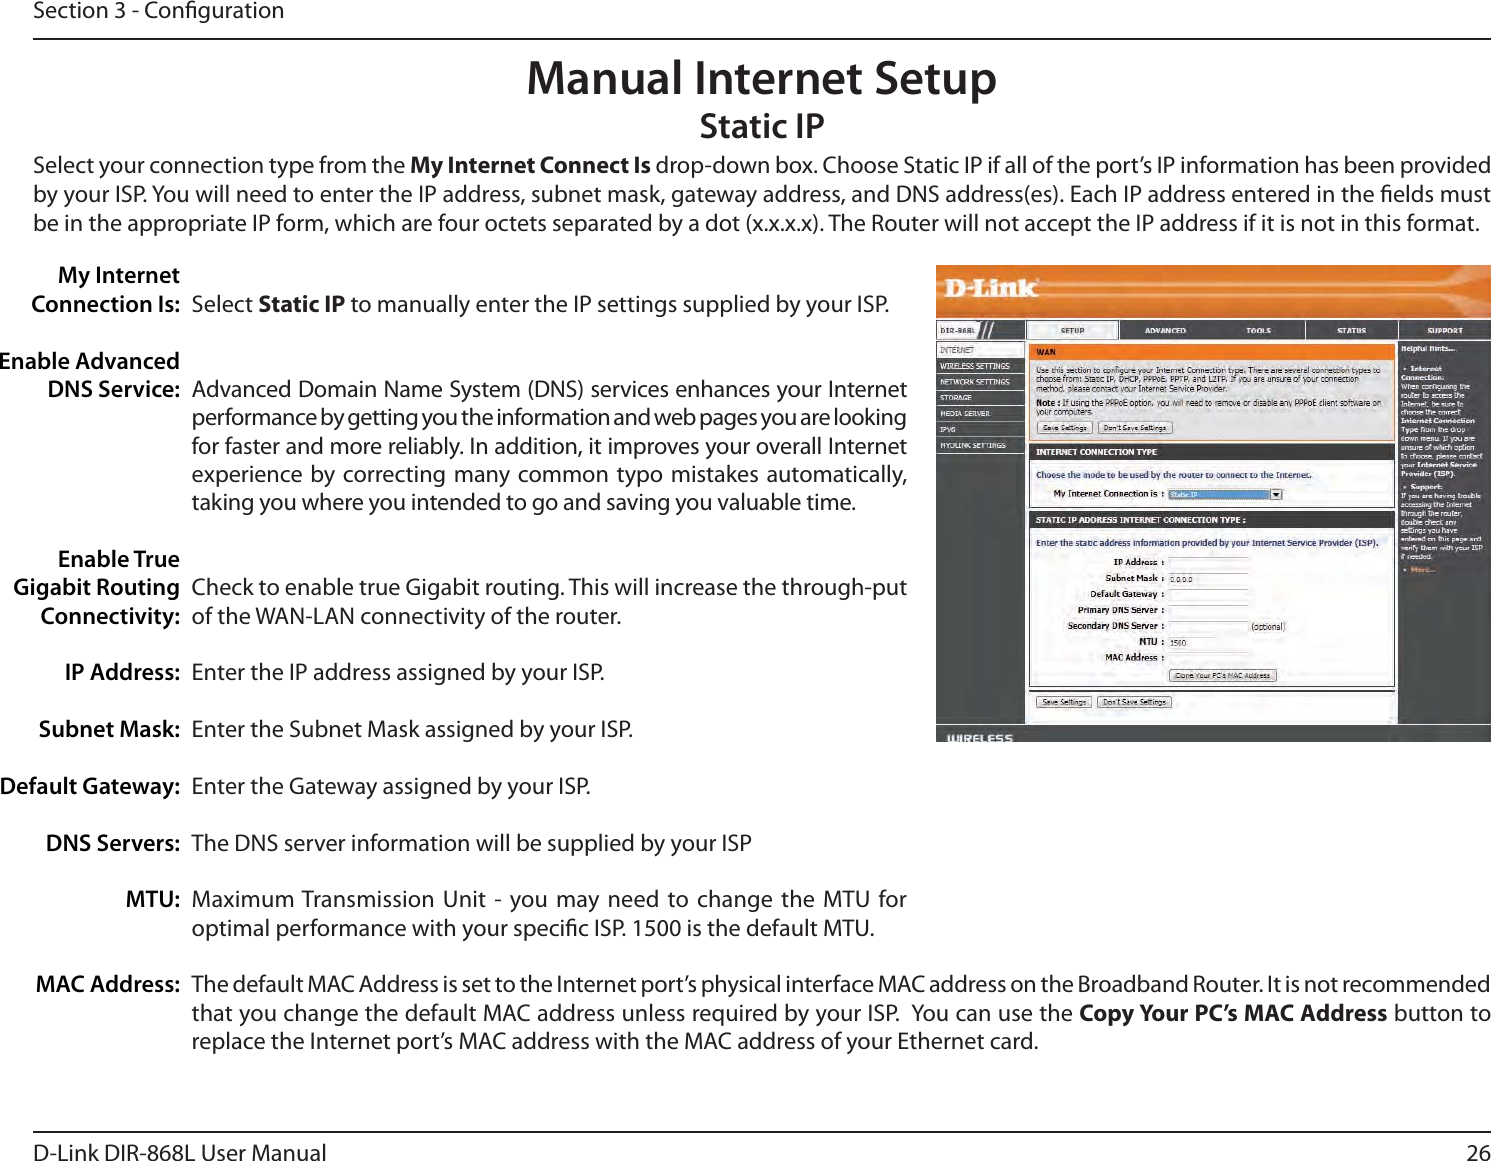 26D-Link DIR-868L User ManualSection 3 - CongurationSelect Static IP to manually enter the IP settings supplied by your ISP.Advanced Domain Name System (DNS) services enhances your Internet performance by getting you the information and web pages you are looking for faster and more reliably. In addition, it improves your overall Internet experience by correcting many common typo mistakes automatically, taking you where you intended to go and saving you valuable time.Check to enable true Gigabit routing. This will increase the through-put of the WAN-LAN connectivity of the router.Enter the IP address assigned by your ISP.Enter the Subnet Mask assigned by your ISP.Enter the Gateway assigned by your ISP.The DNS server information will be supplied by your ISPMaximum Transmission Unit - you may need to change the MTU for optimal performance with your specic ISP. 1500 is the default MTU.The default MAC Address is set to the Internet port’s physical interface MAC address on the Broadband Router. It is not recommended that you change the default MAC address unless required by your ISP.  You can use the Copy Your PC’s MAC Address button to replace the Internet port’s MAC address with the MAC address of your Ethernet card.My Internet Connection Is:Enable Advanced DNS Service:Enable True Gigabit Routing Connectivity:IP Address:Subnet Mask:Default Gateway:DNS Servers:MTU:MAC Address:Manual Internet SetupStatic IPSelect your connection type from the My Internet Connect Is drop-down box. Choose Static IP if all of the port’s IP information has been provided by your ISP. You will need to enter the IP address, subnet mask, gateway address, and DNS address(es). Each IP address entered in the elds must be in the appropriate IP form, which are four octets separated by a dot (x.x.x.x). The Router will not accept the IP address if it is not in this format.